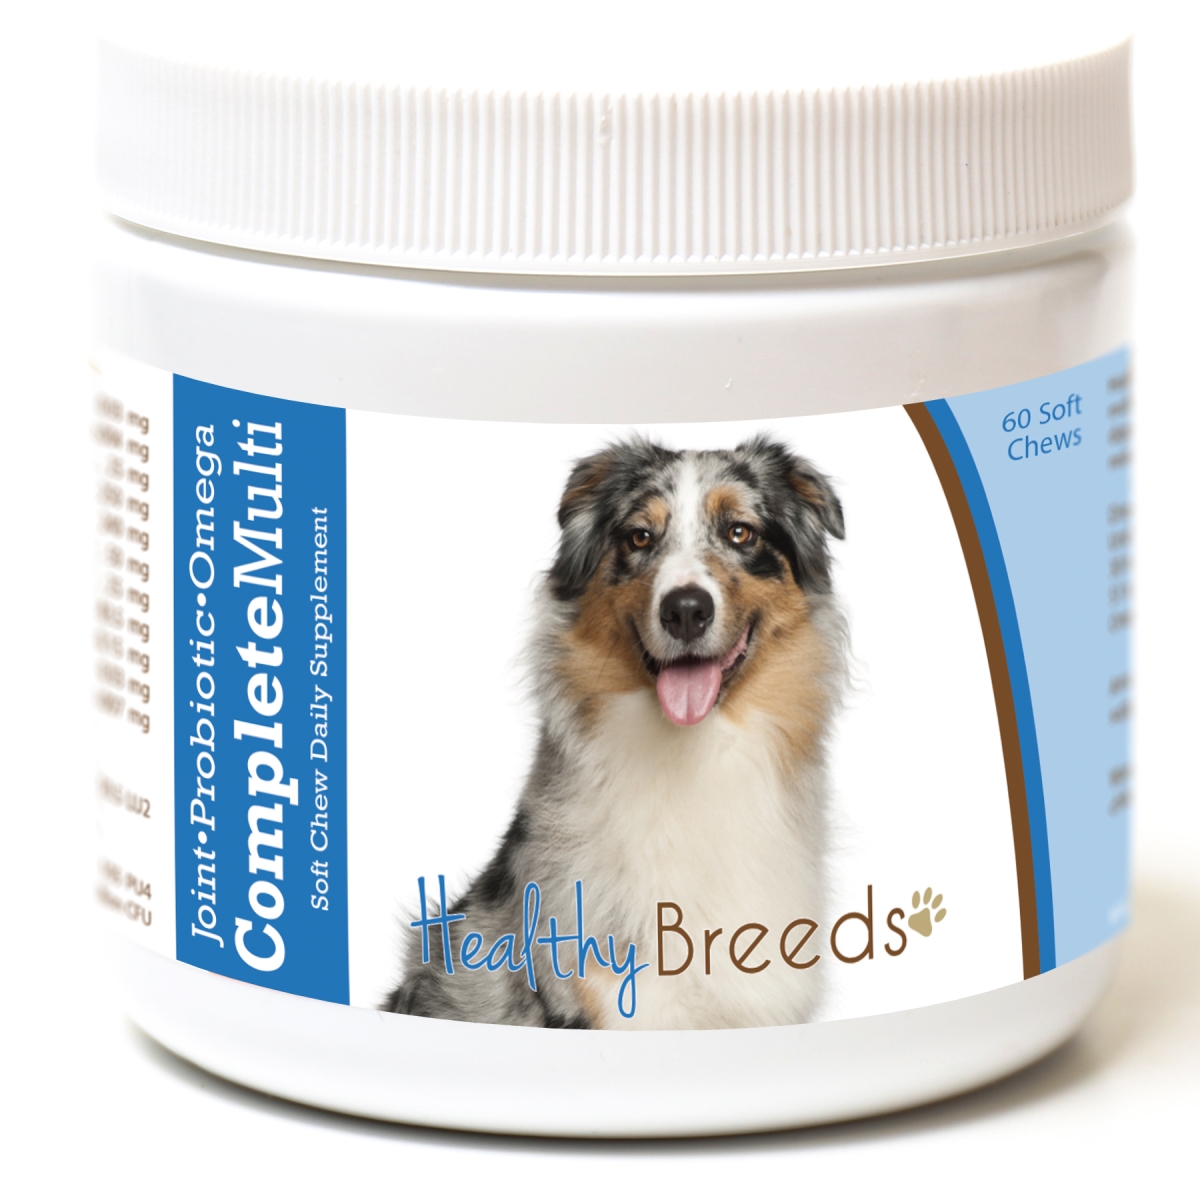 Picture of Healthy Breeds 192959007275 Australian Shepherd All in One Multivitamin Soft Chew - 60 Count